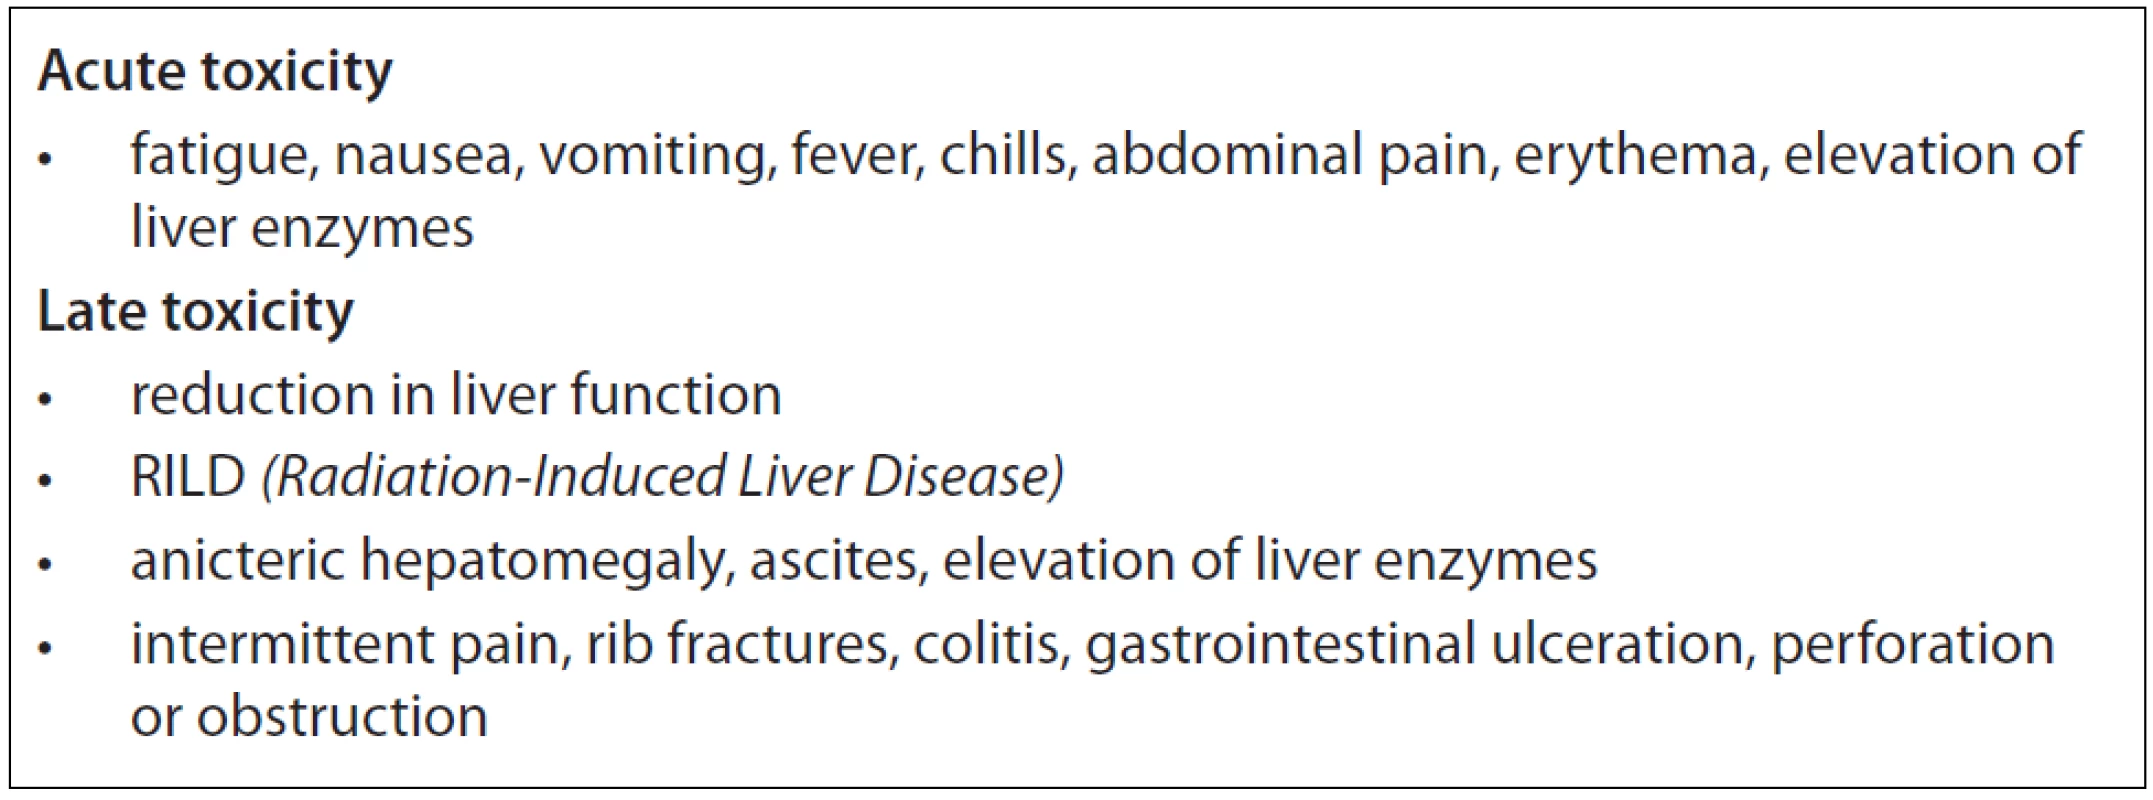 Possible acute and late toxicity listed in the literature.